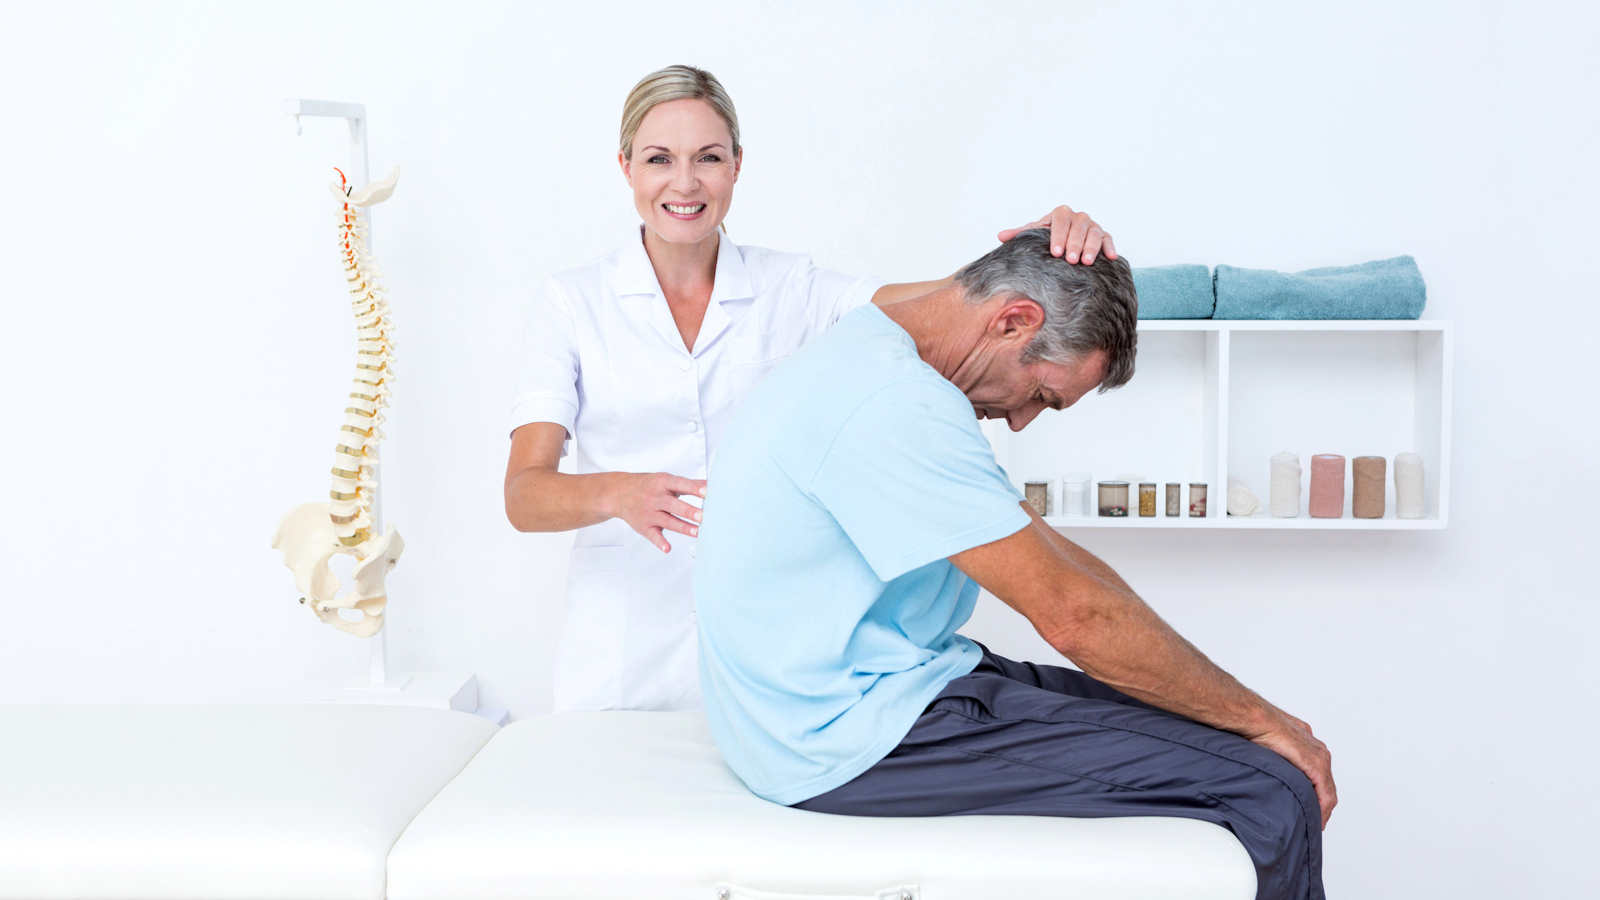 South Square Chiropractic of Durham